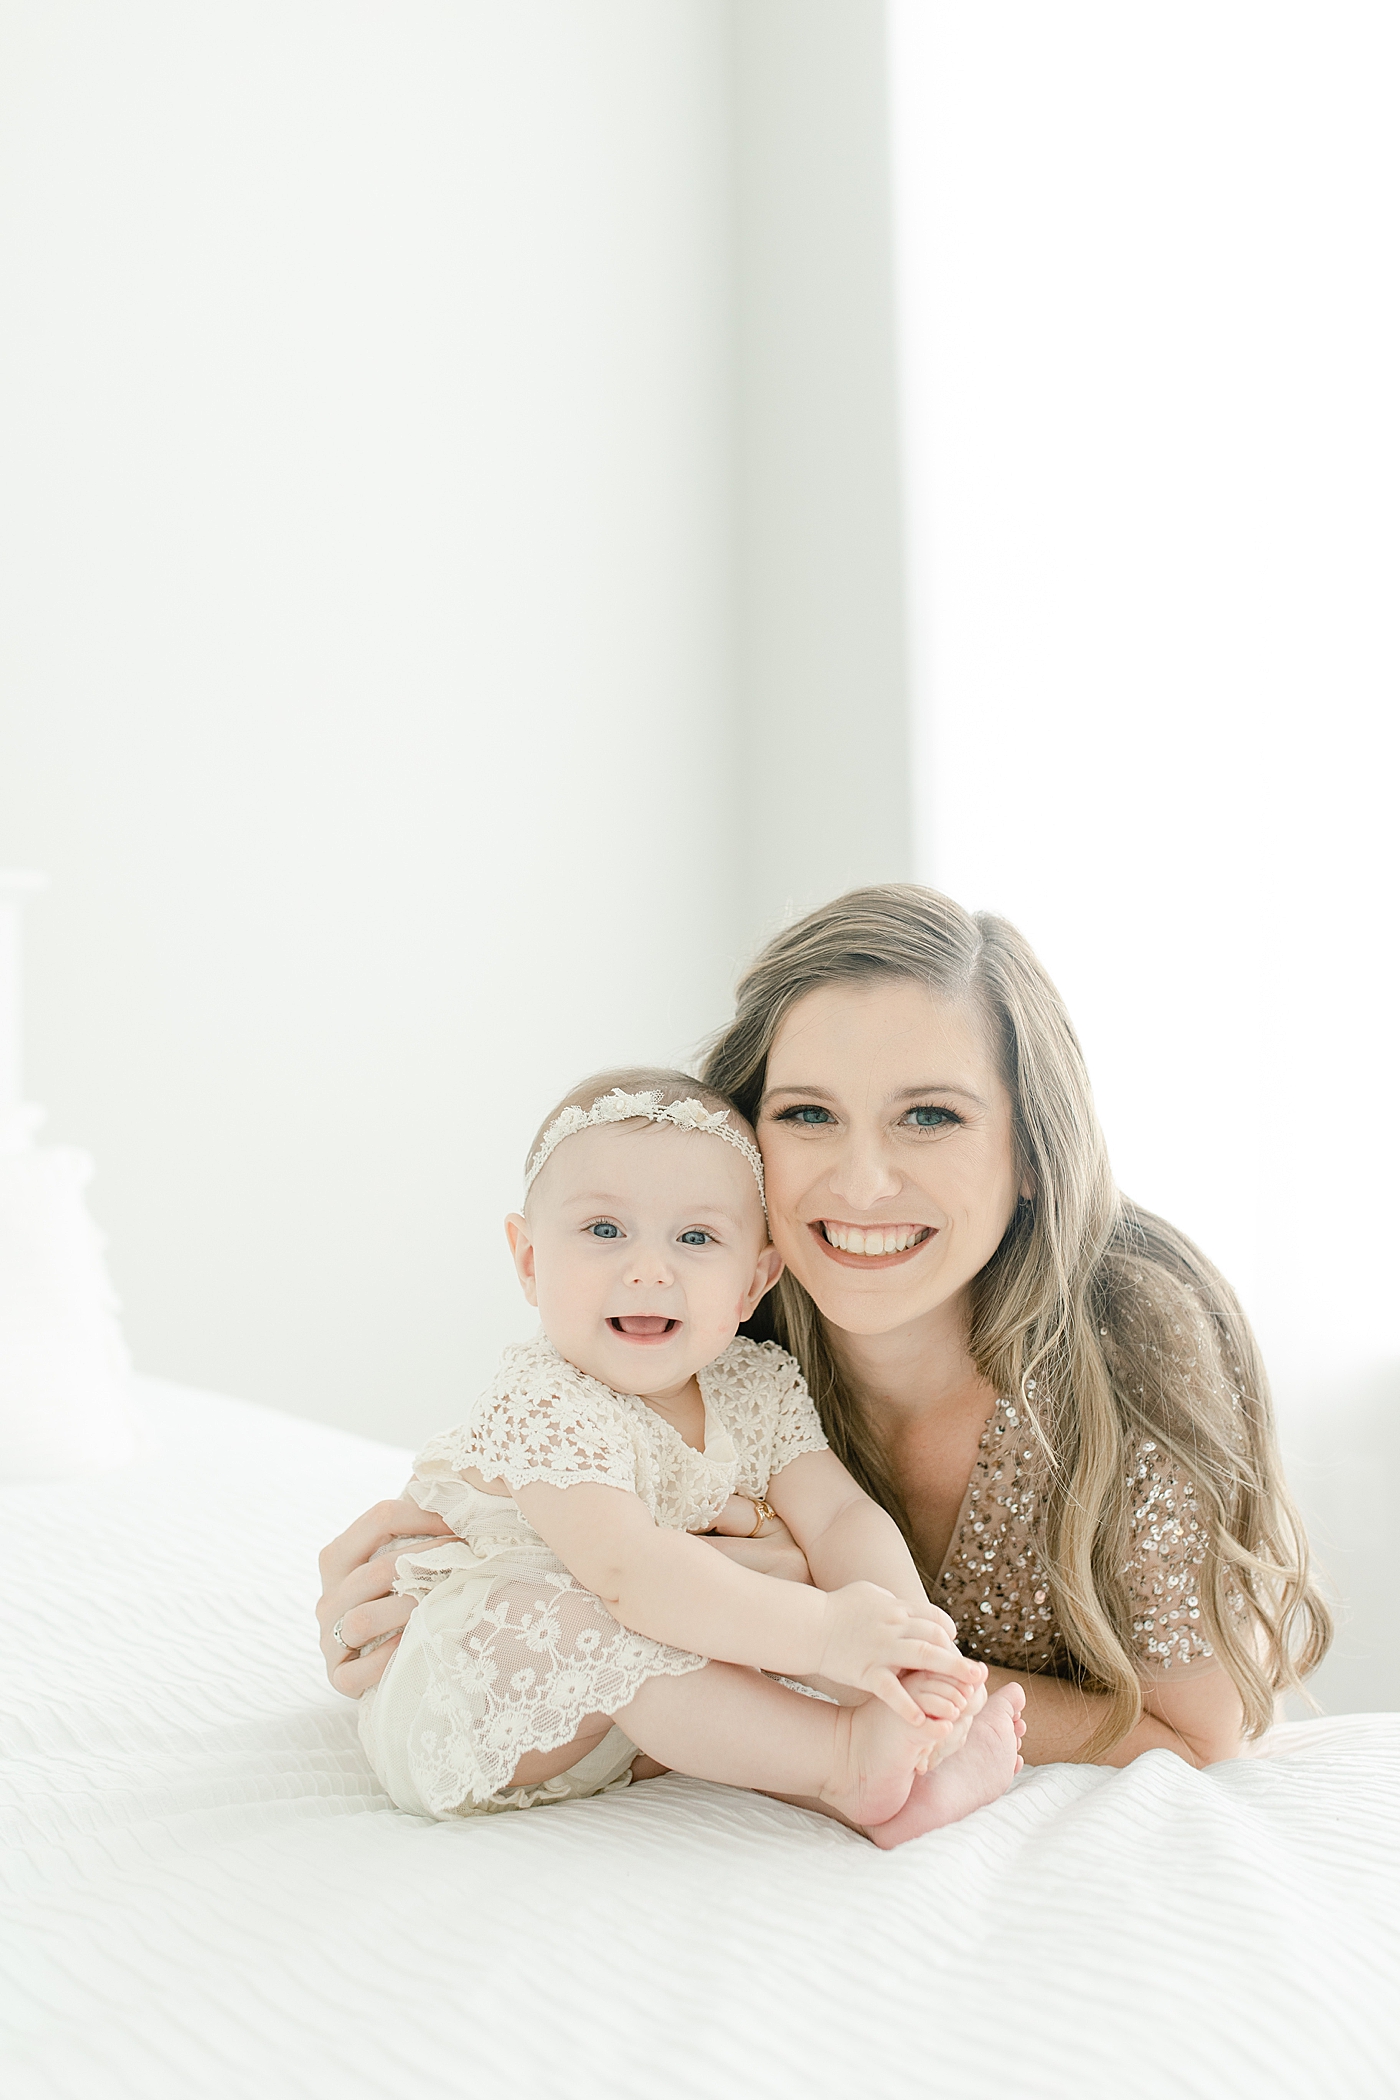 Mom and baby girl smiling during her sitter milestone session | Photo by Pass Christian baby photographer Little Sunshine Photography